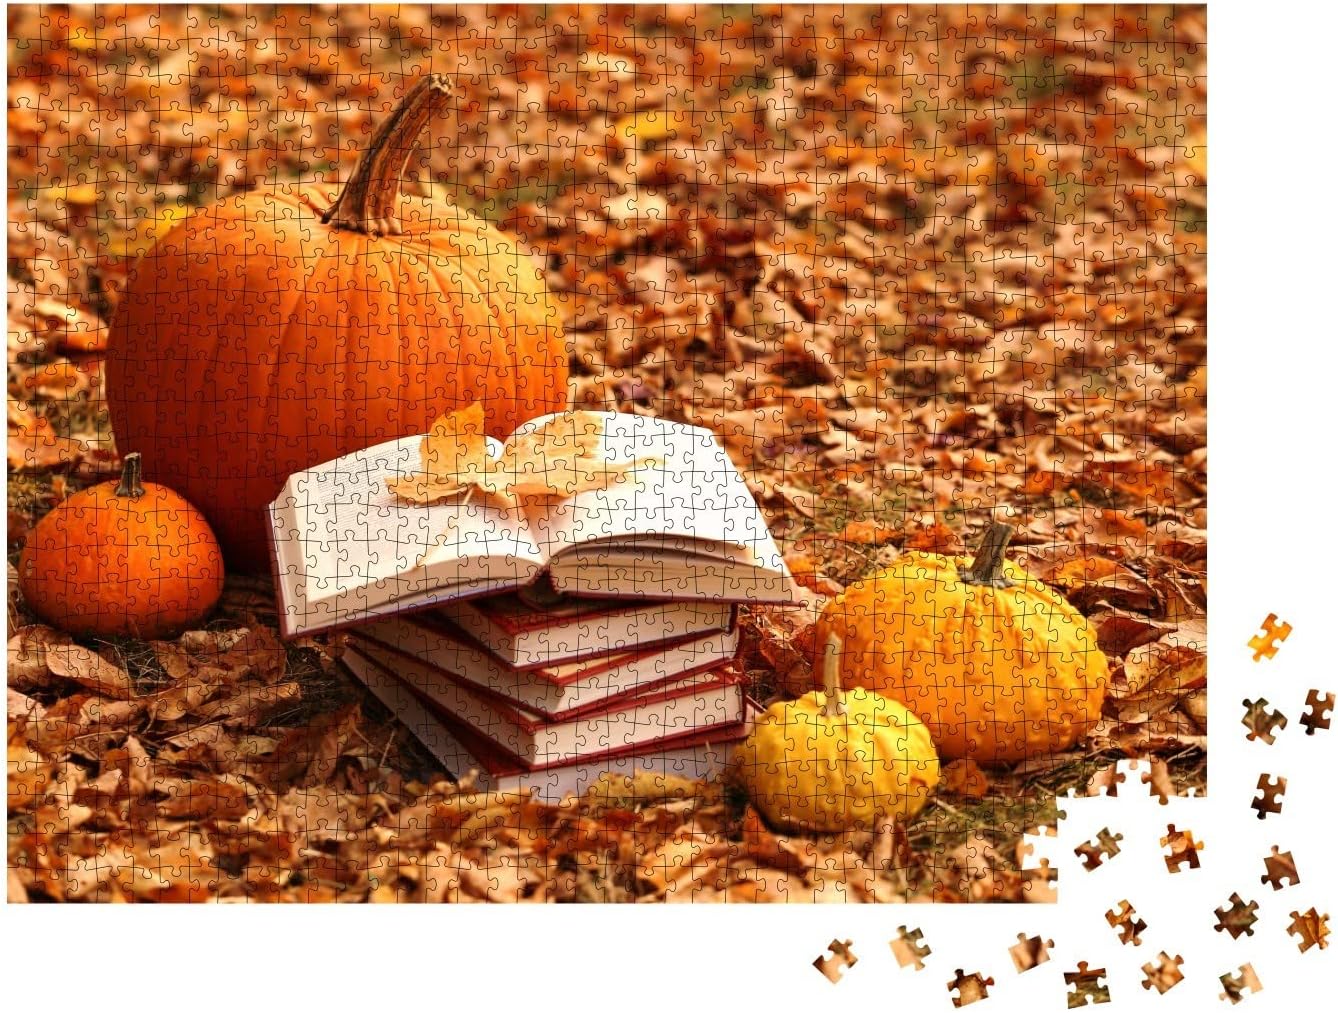 Autumn Books. Reading Books About Autumn. Halloween Books... Jigsaw Puzzle Jigsaw Puzzle with 1000 Pieces